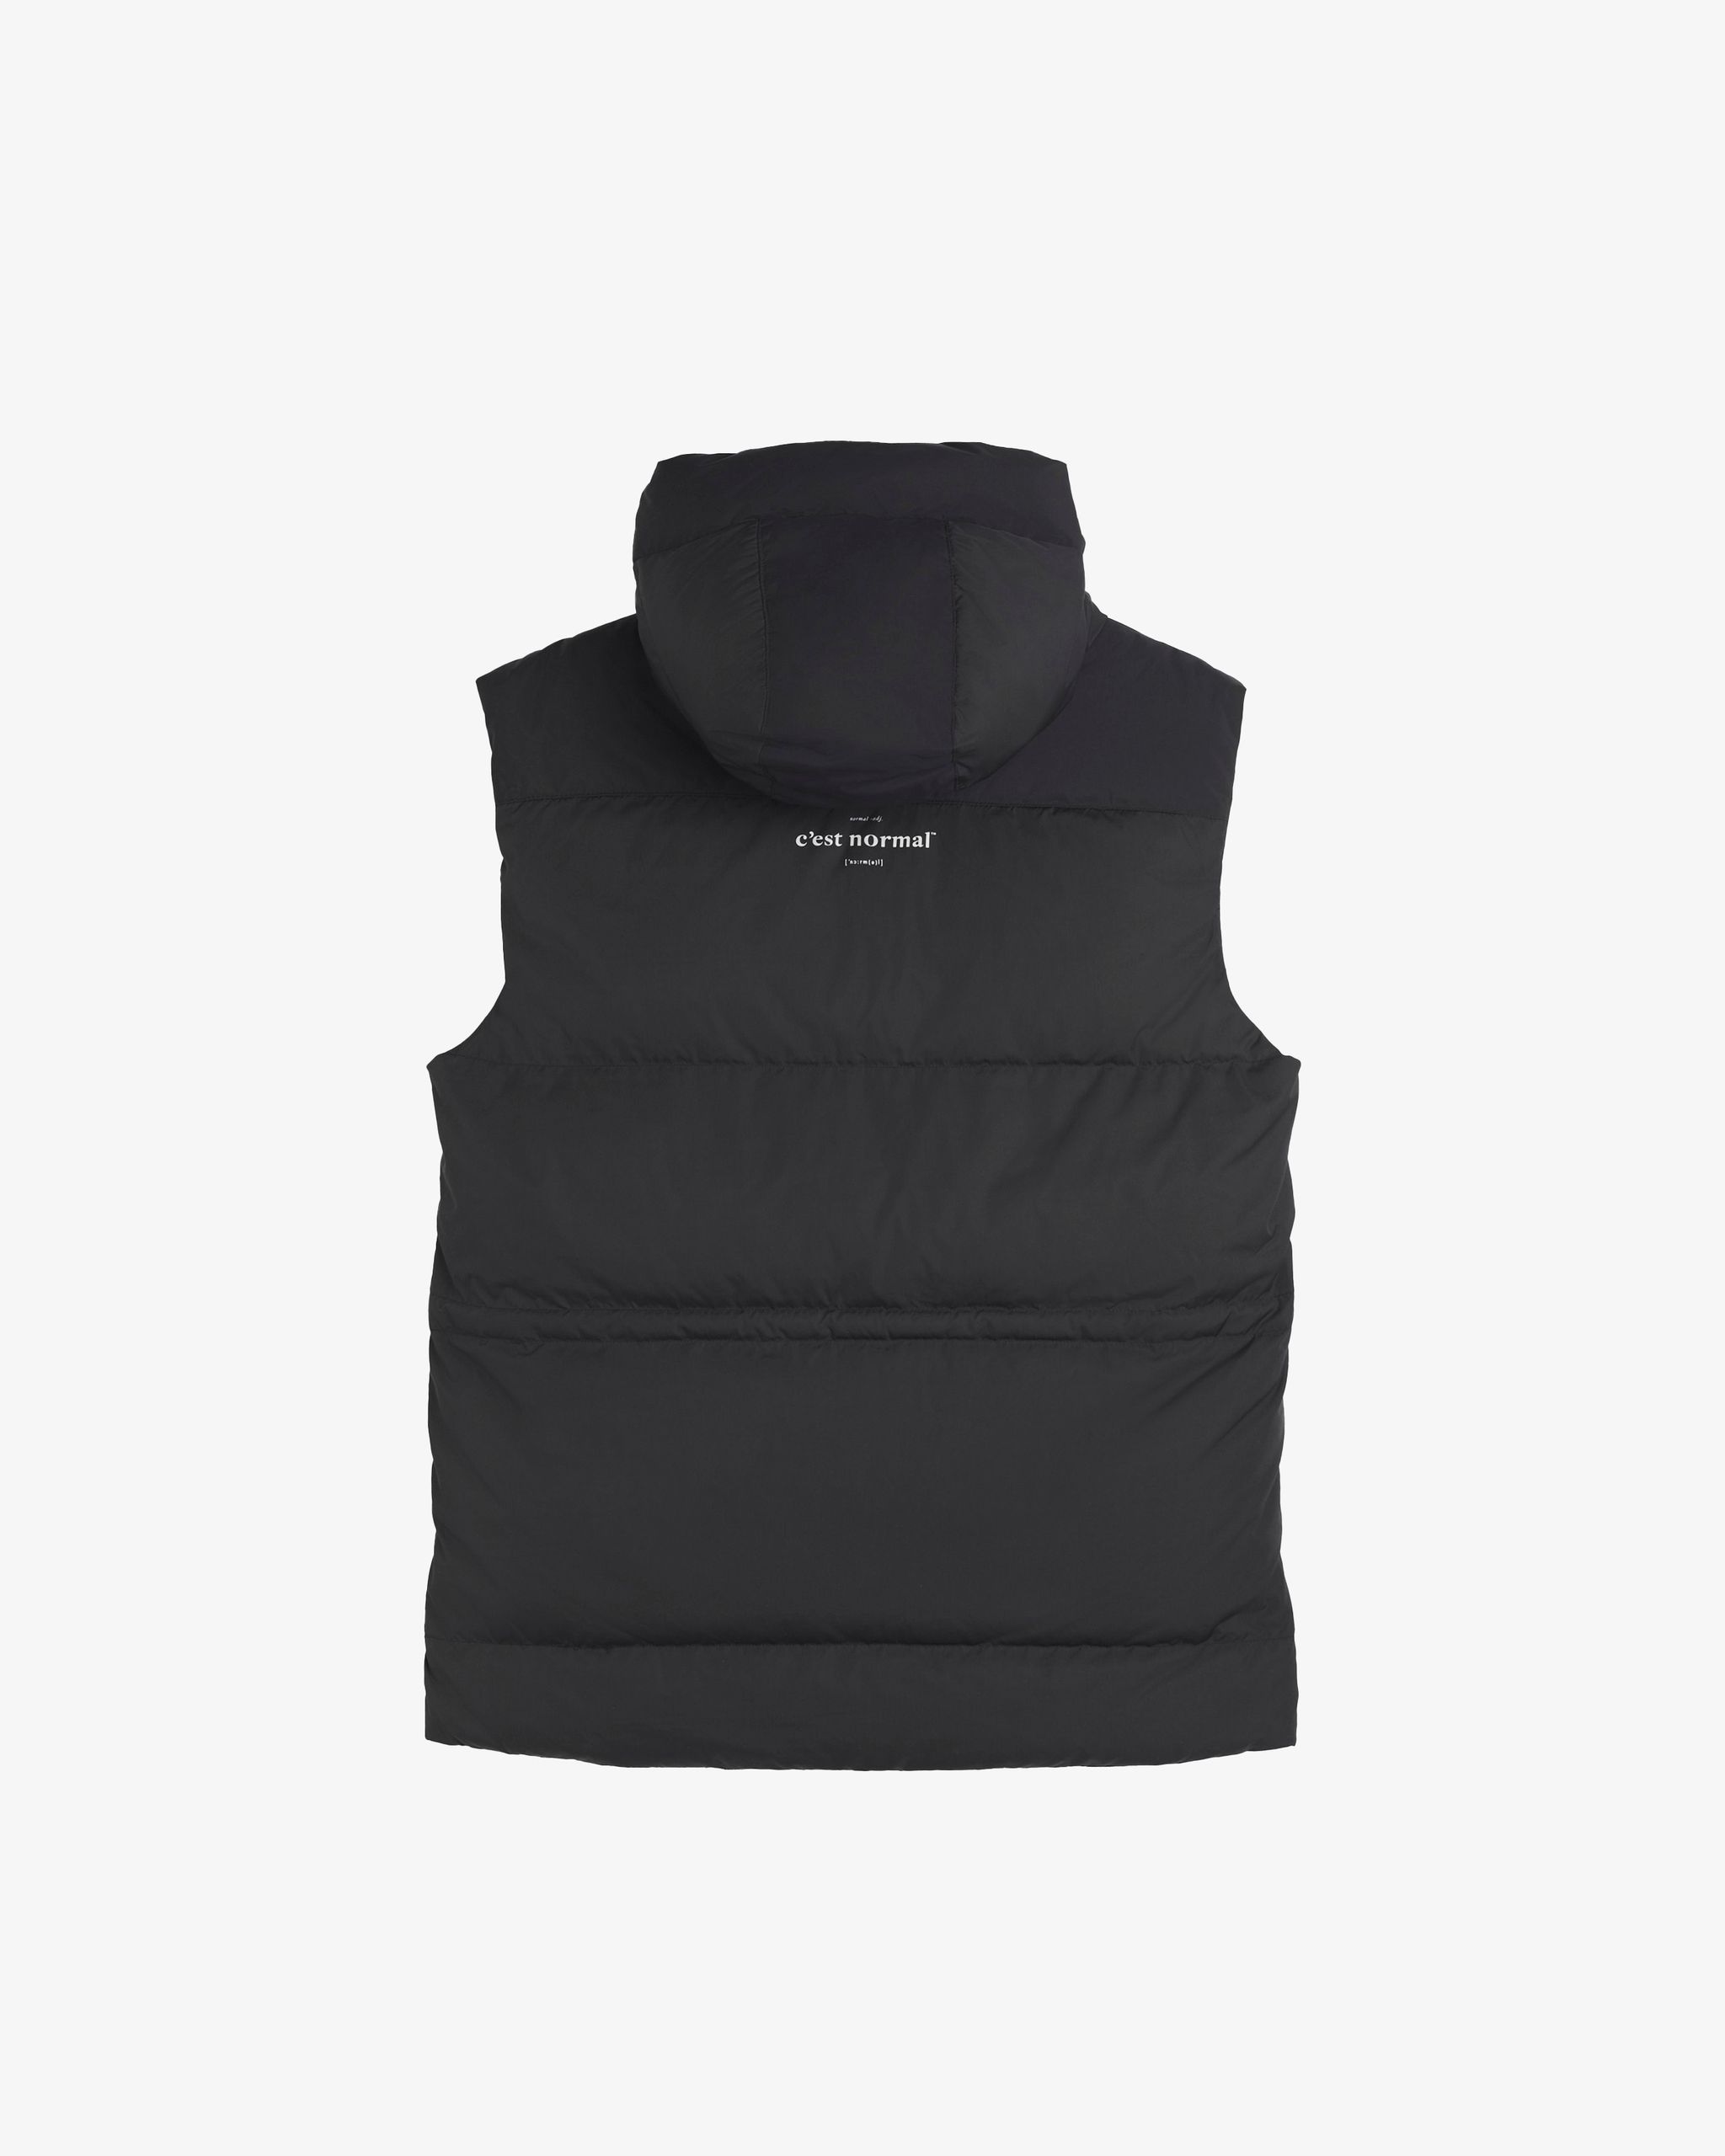 The Ultimate Vest | c'est normal - Around here.